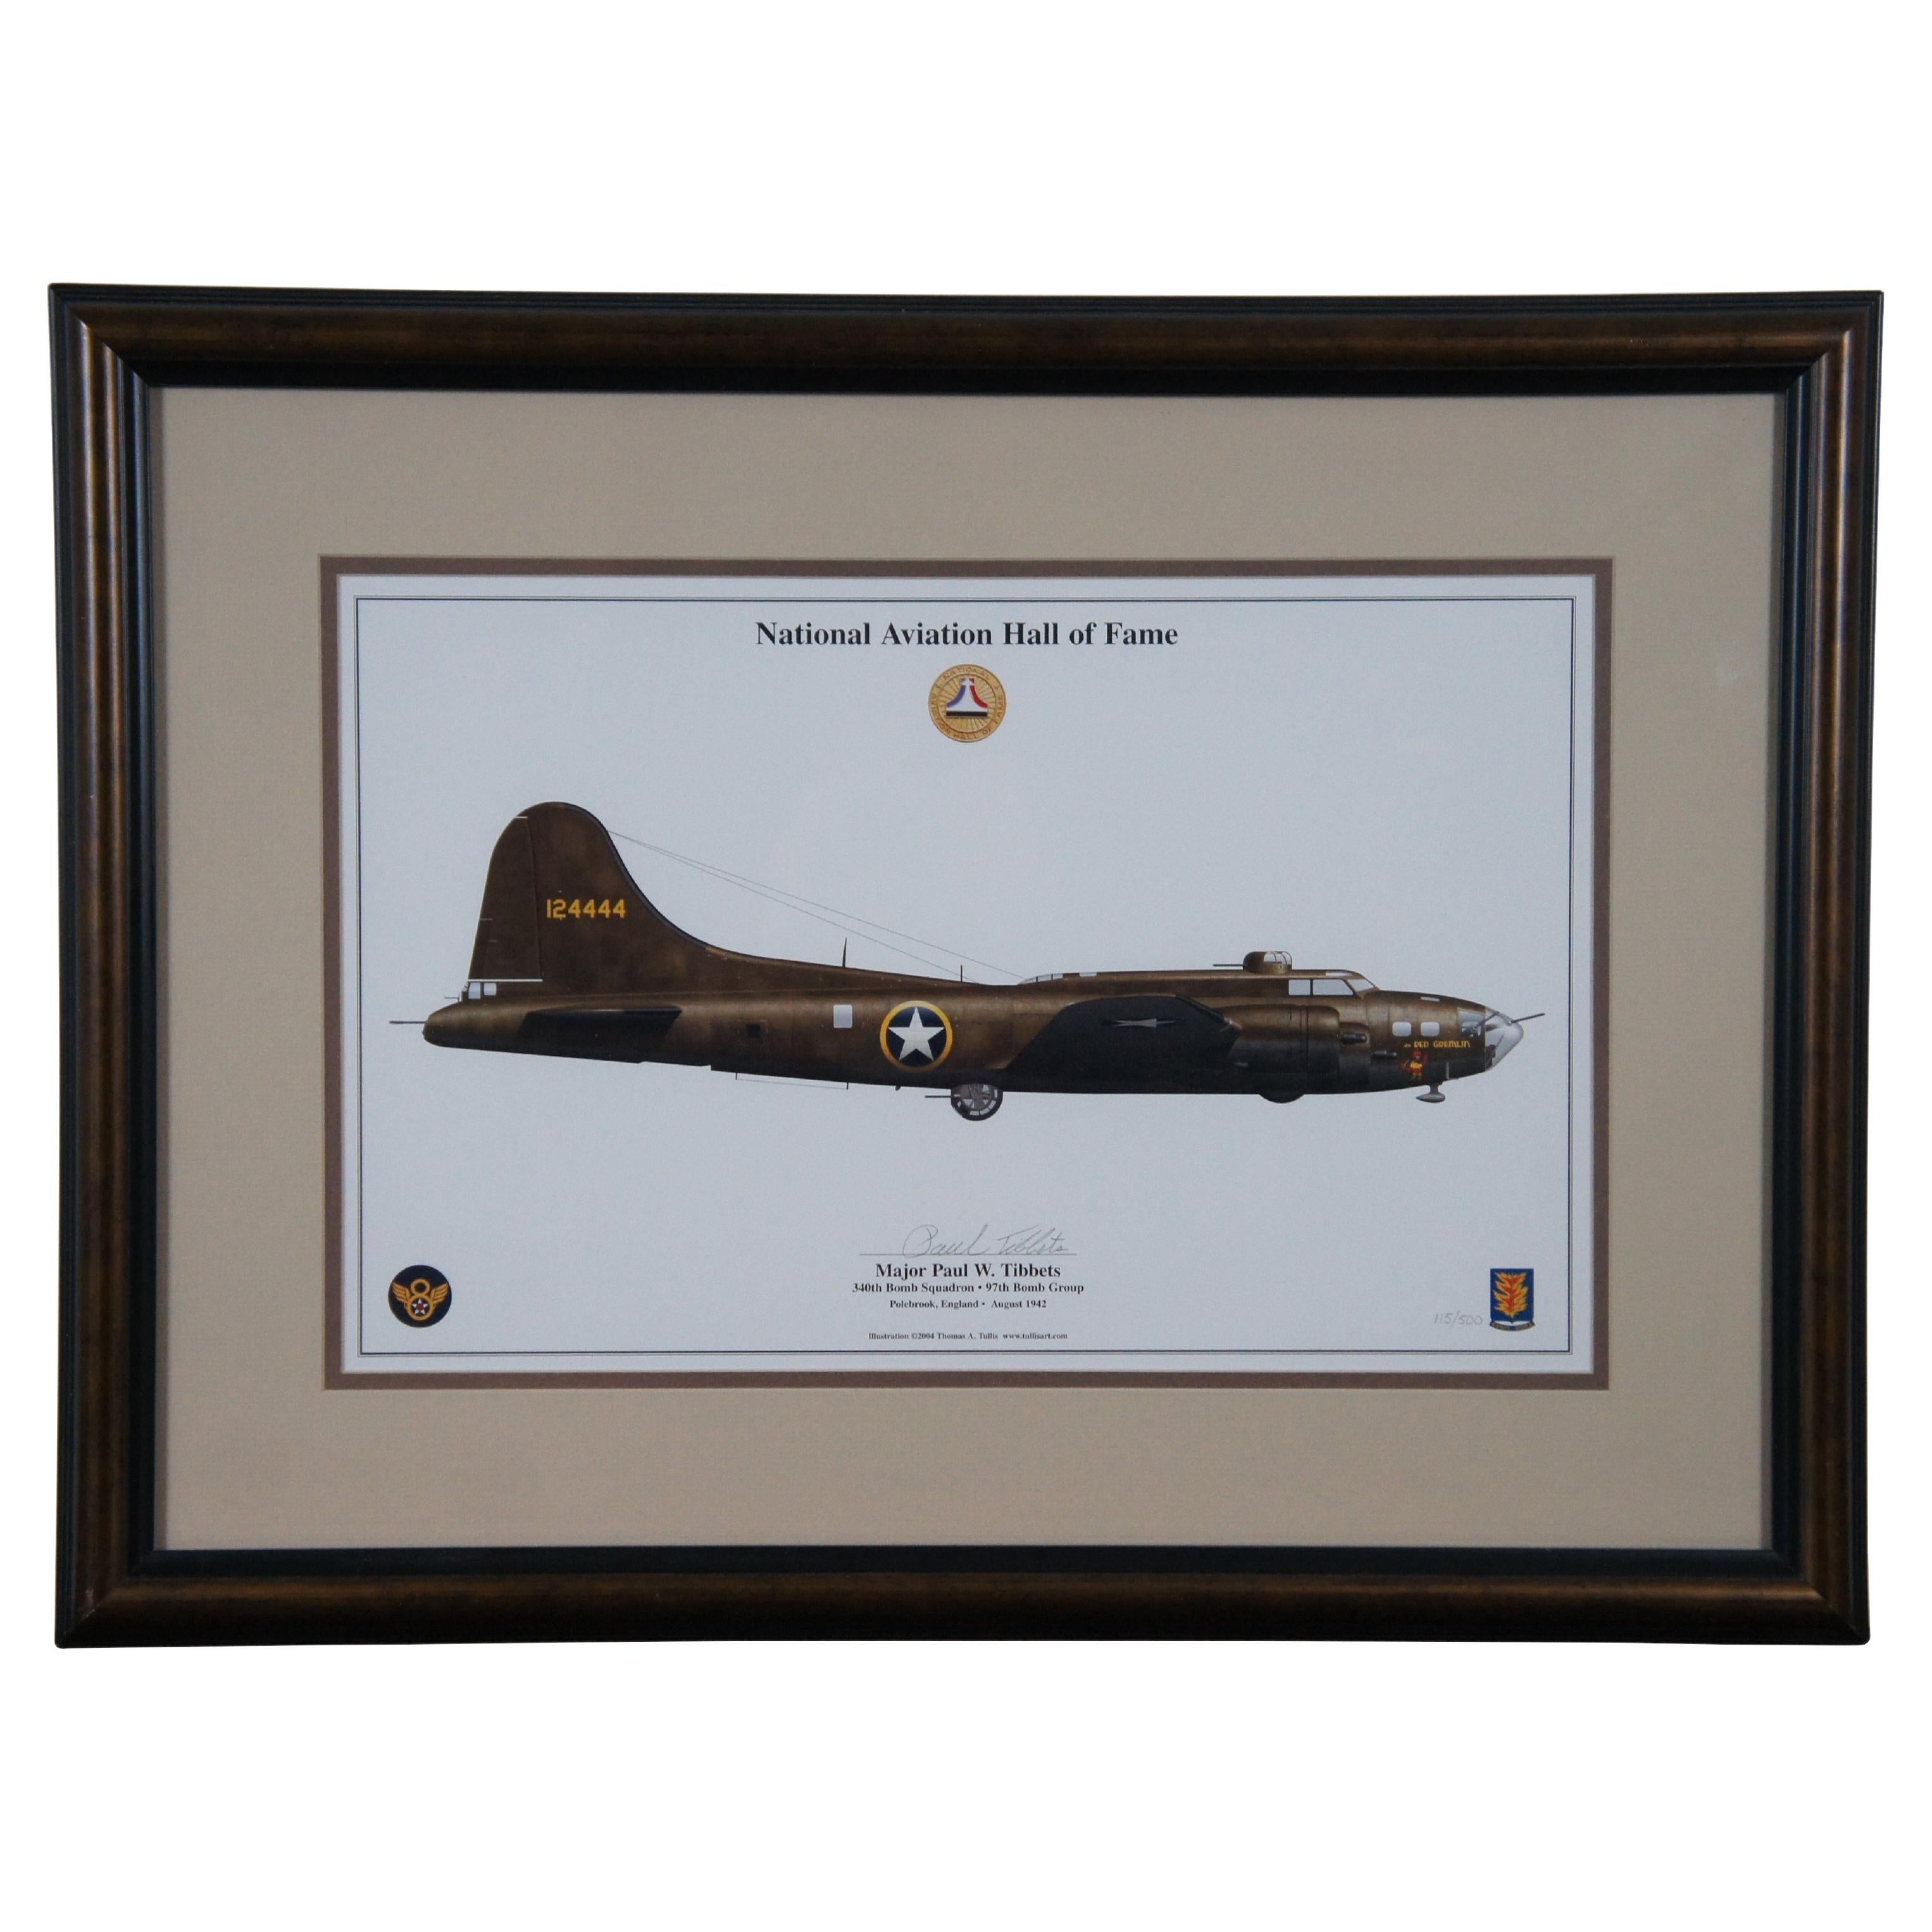 National Aviation Hall of Fame B-17 Gremlin Major Paul W. Tibbets Bomb Squad S&N For Sale